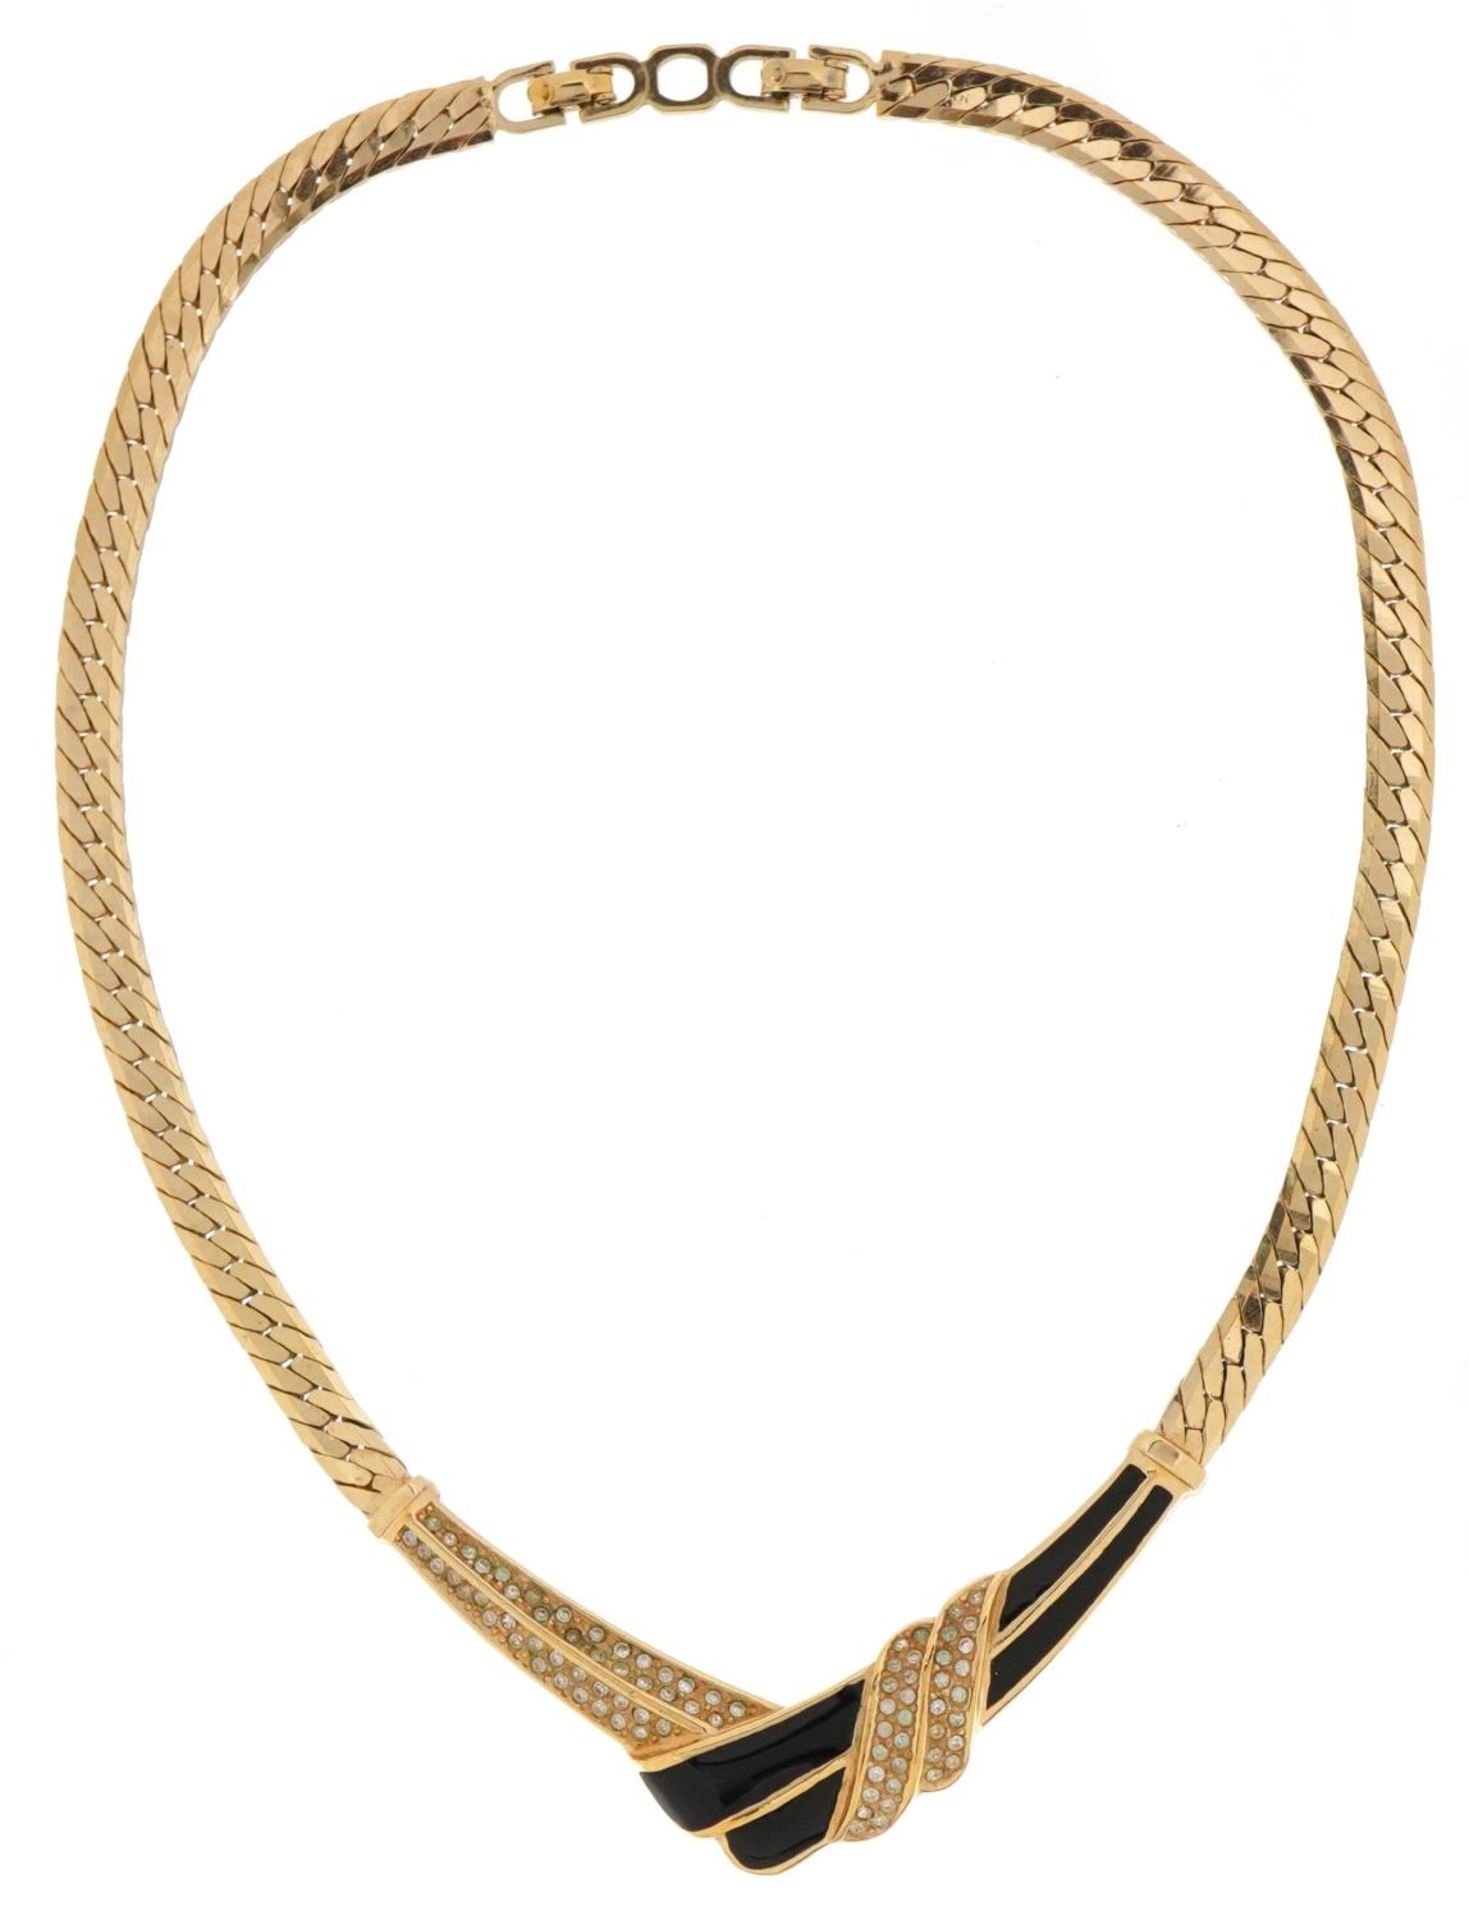 Christian Dior, vintage gold plated black enamel and clear stone necklace, 40cm in length, 43.5g - Bild 2 aus 4